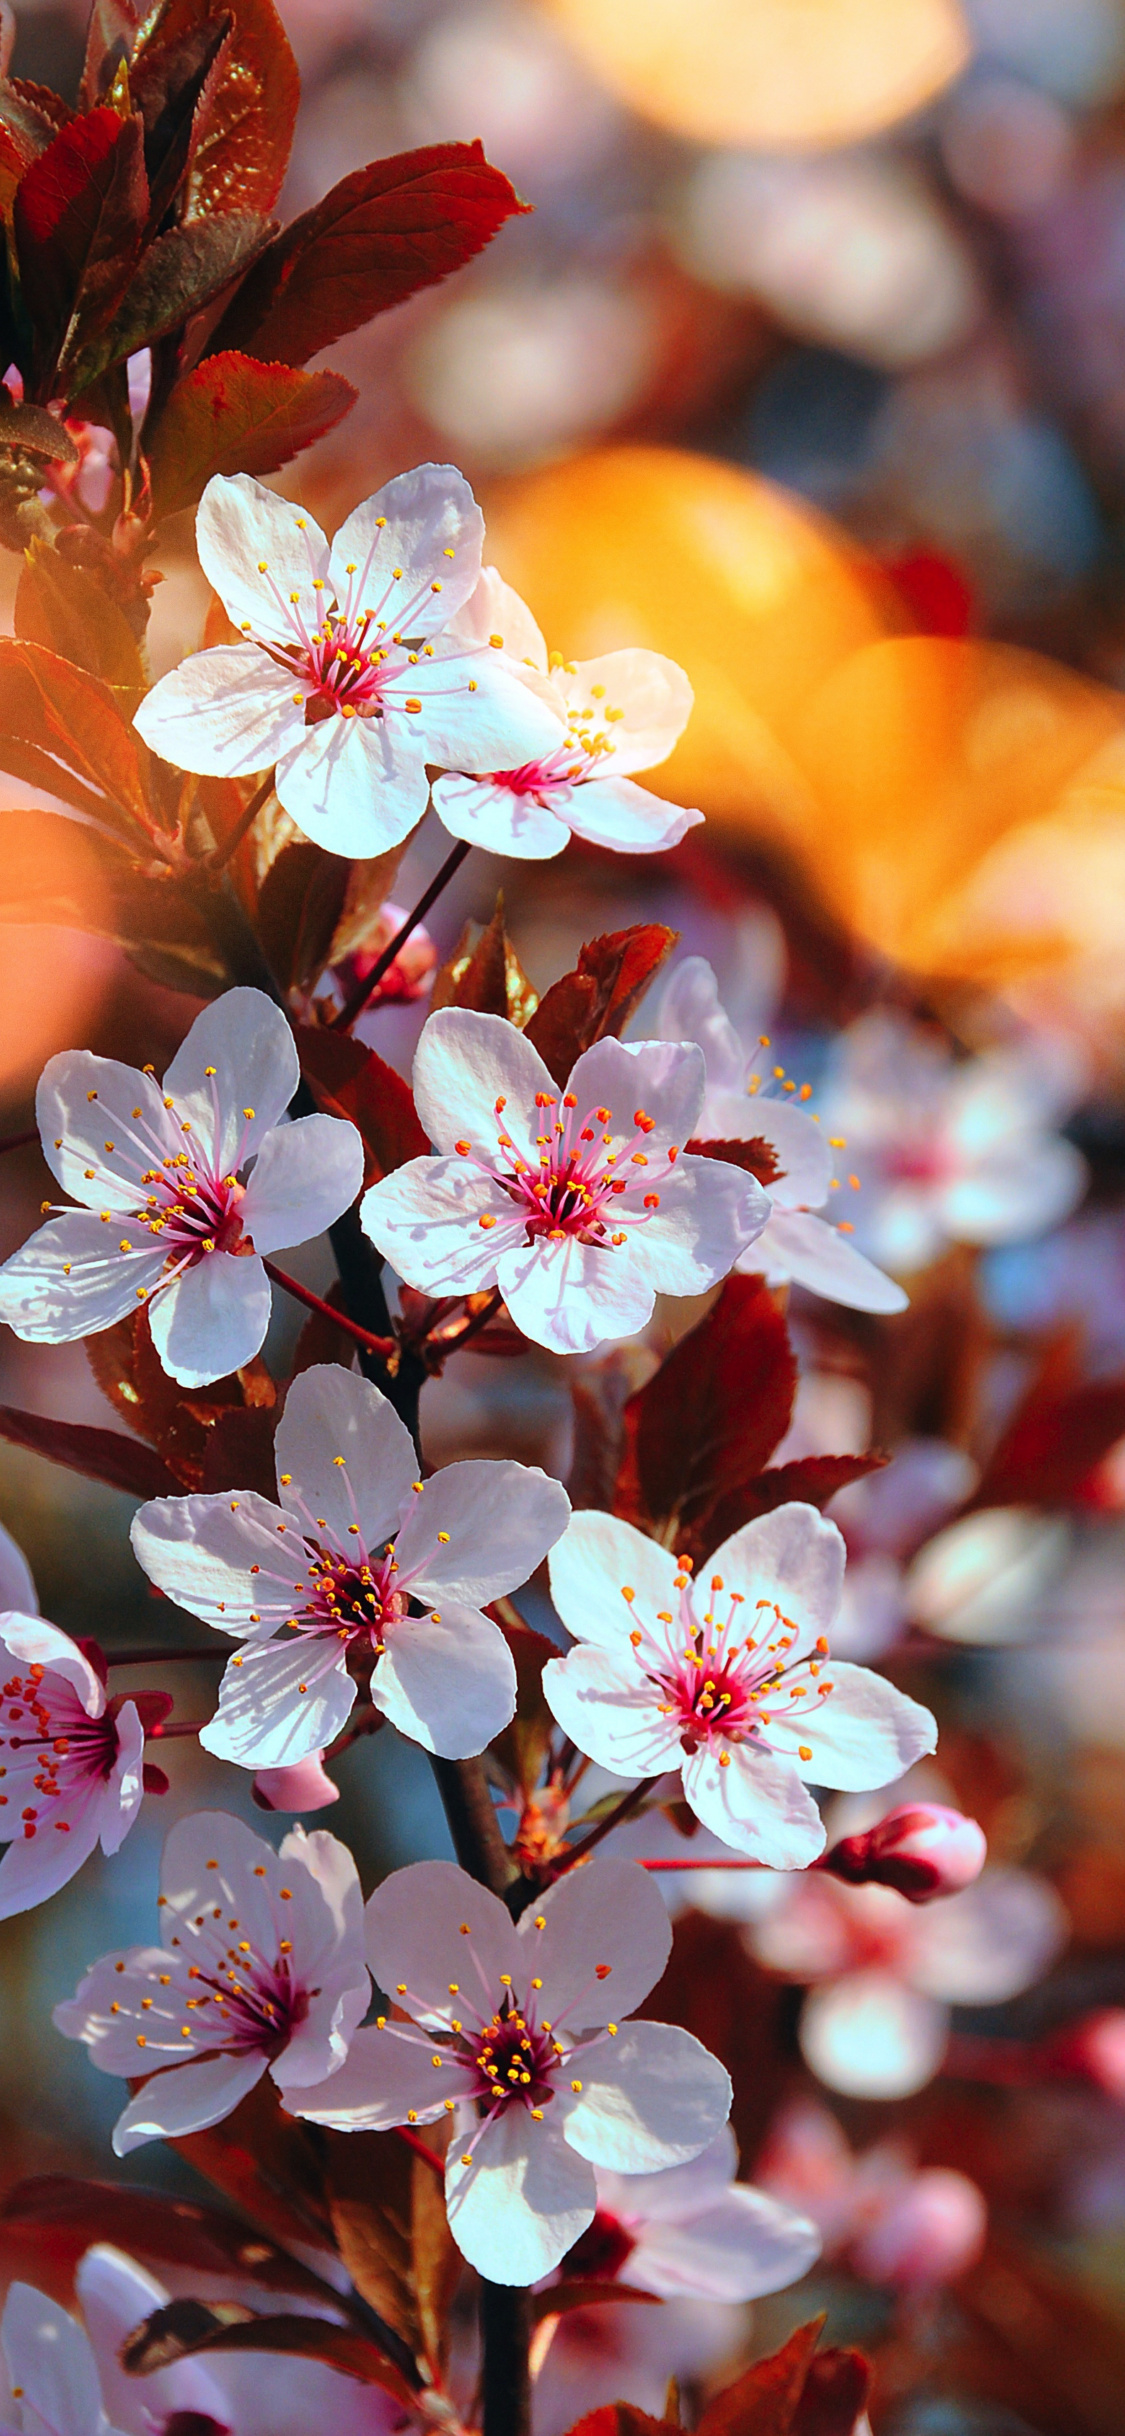 Download 1125x2436 wallpaper cherry blossom, pink flowers, close